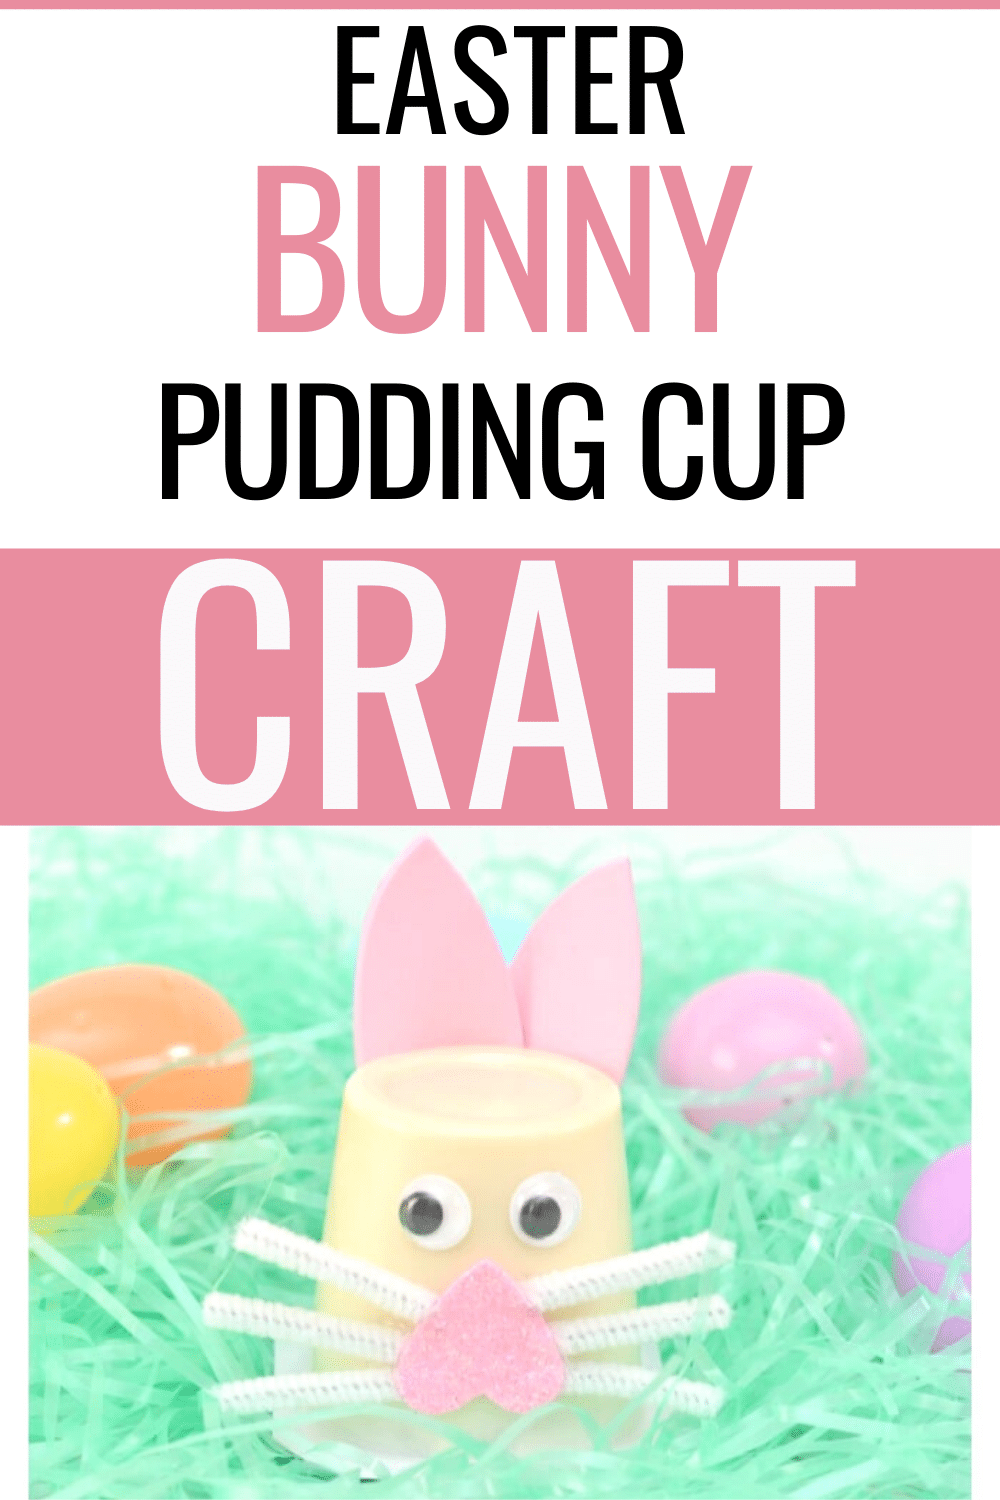 This bunny pudding cup craft is really easy and so cute! Perfect surprise for your child's lunchbox! #Easter #bunny #lunchfun #funfoodforkids via @wondermomwannab